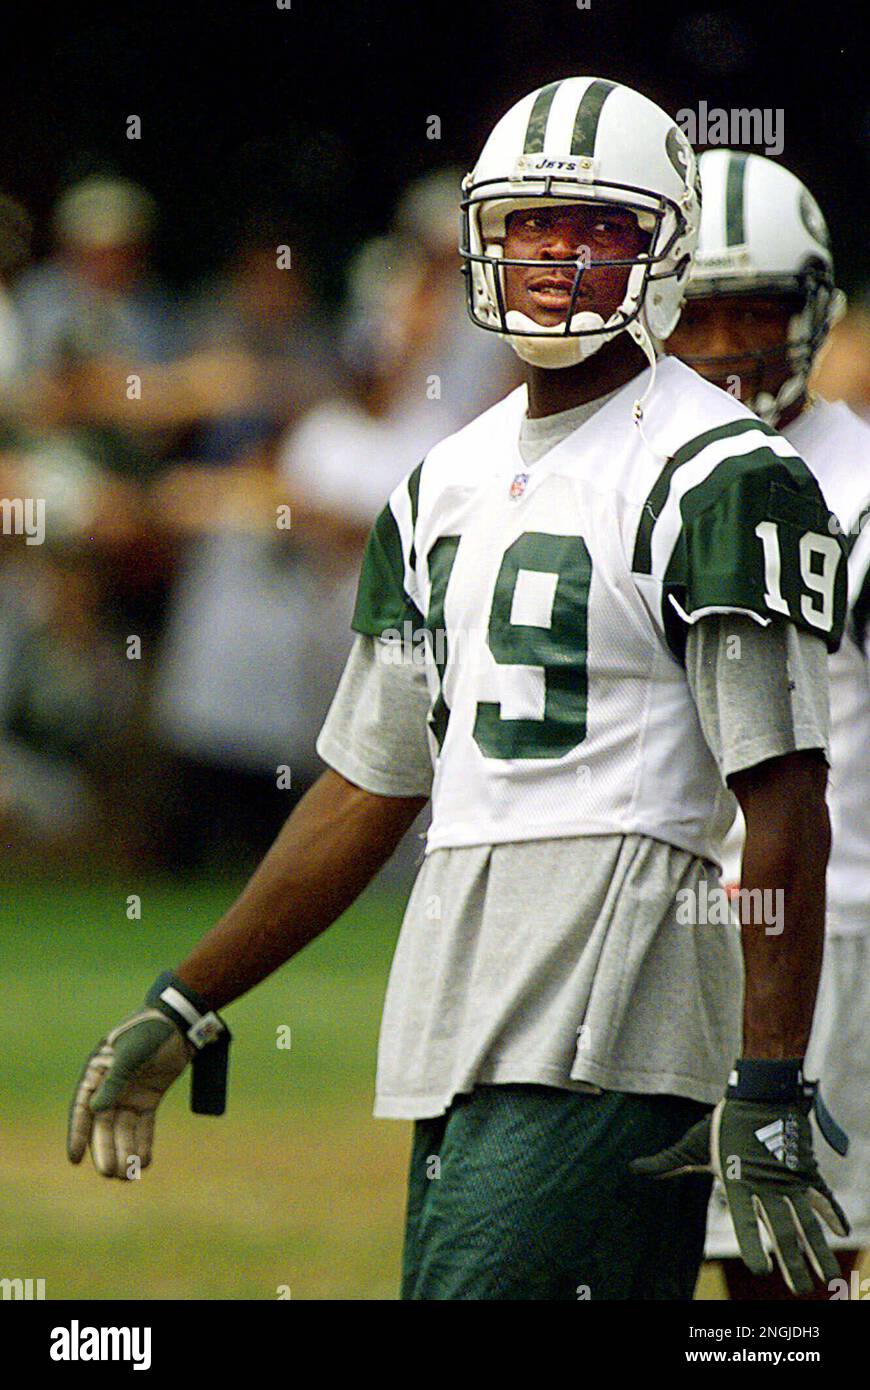 New York Jets' Keyshawn Johnson watches a play during Jets training camp in  Hempstead, N.Y., Friday, Aug. 19, 1999. (AP Photo/Ed Betz Stock Photo -  Alamy